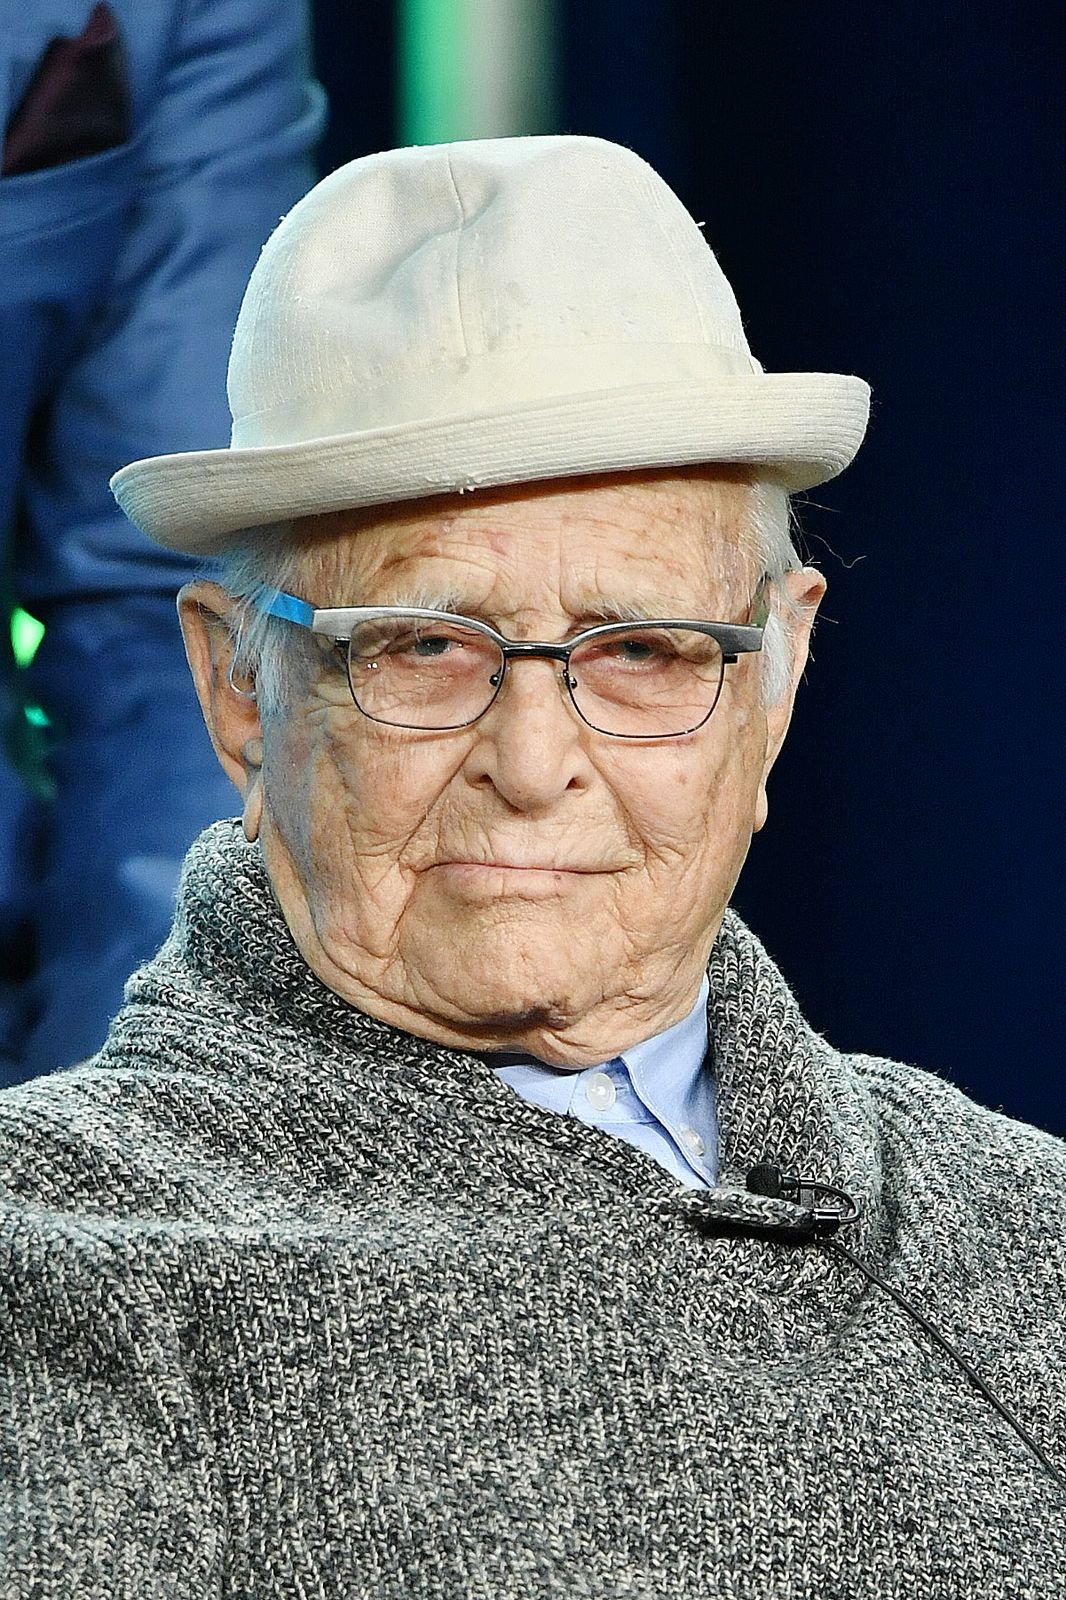 Norman Lear at the Pop TV segment of the 2020 Winter TCA Press Tour at The Langham Huntington, Pasadena on January 13, 2020 | Photo: Getty Images